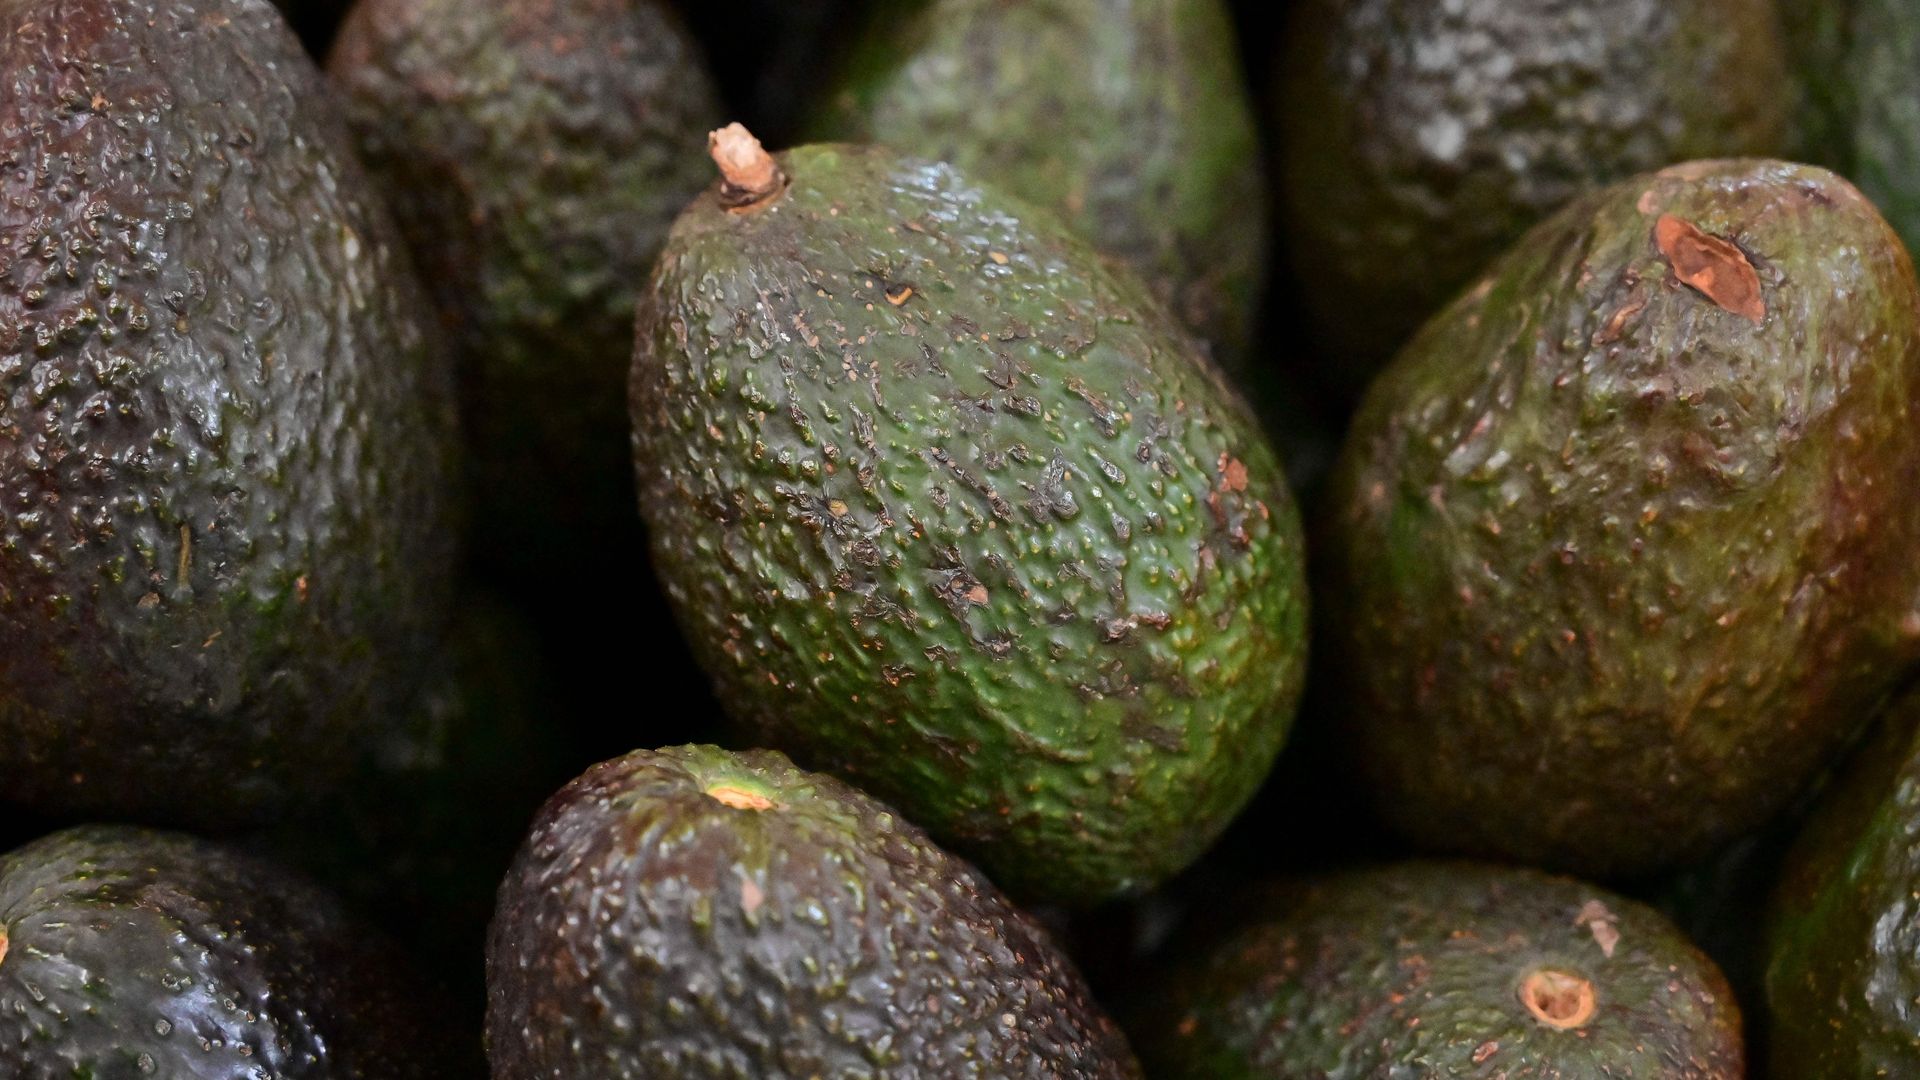  Avocados for sale at a market in Mexico City on Feb. 15.